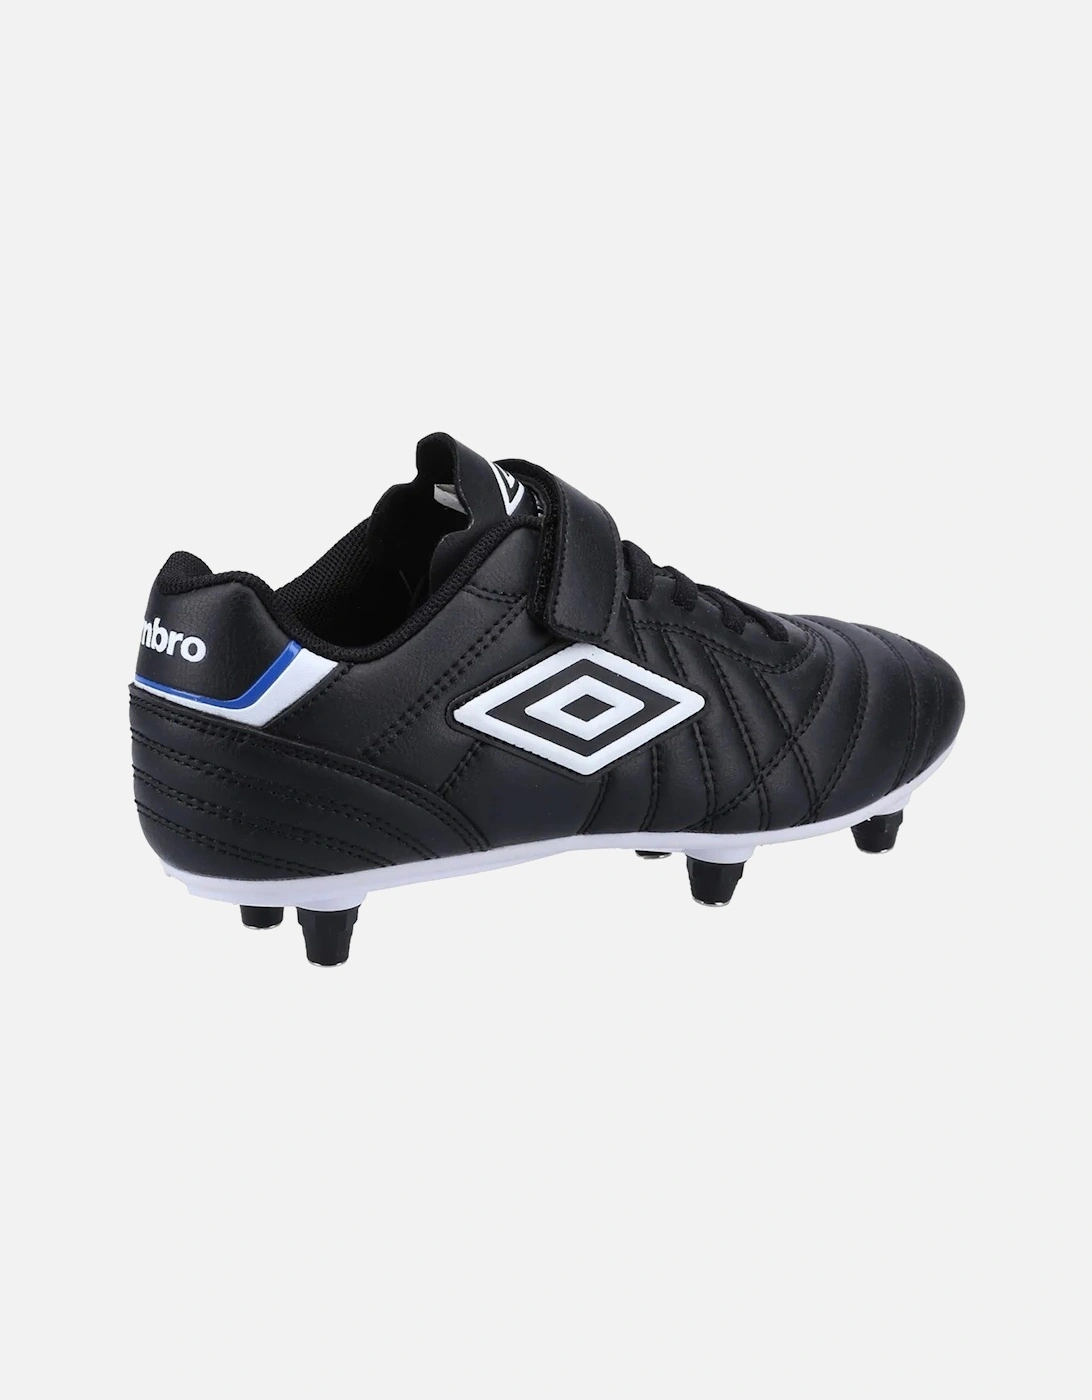 Childrens/Kids Speciali Liga Leather Football Boots